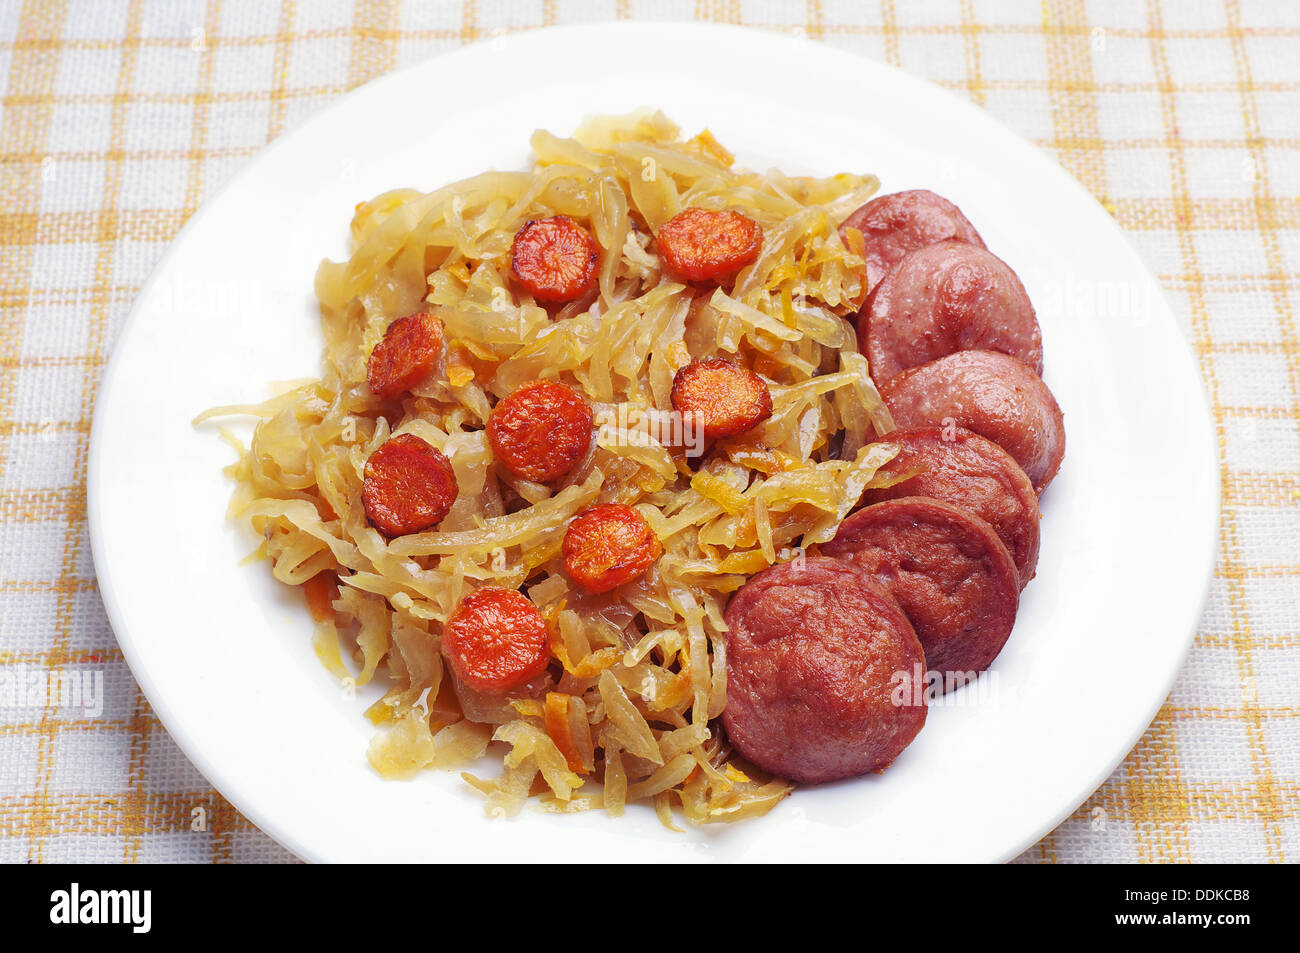 Braised cabbage with sausage on a table Stock Photo